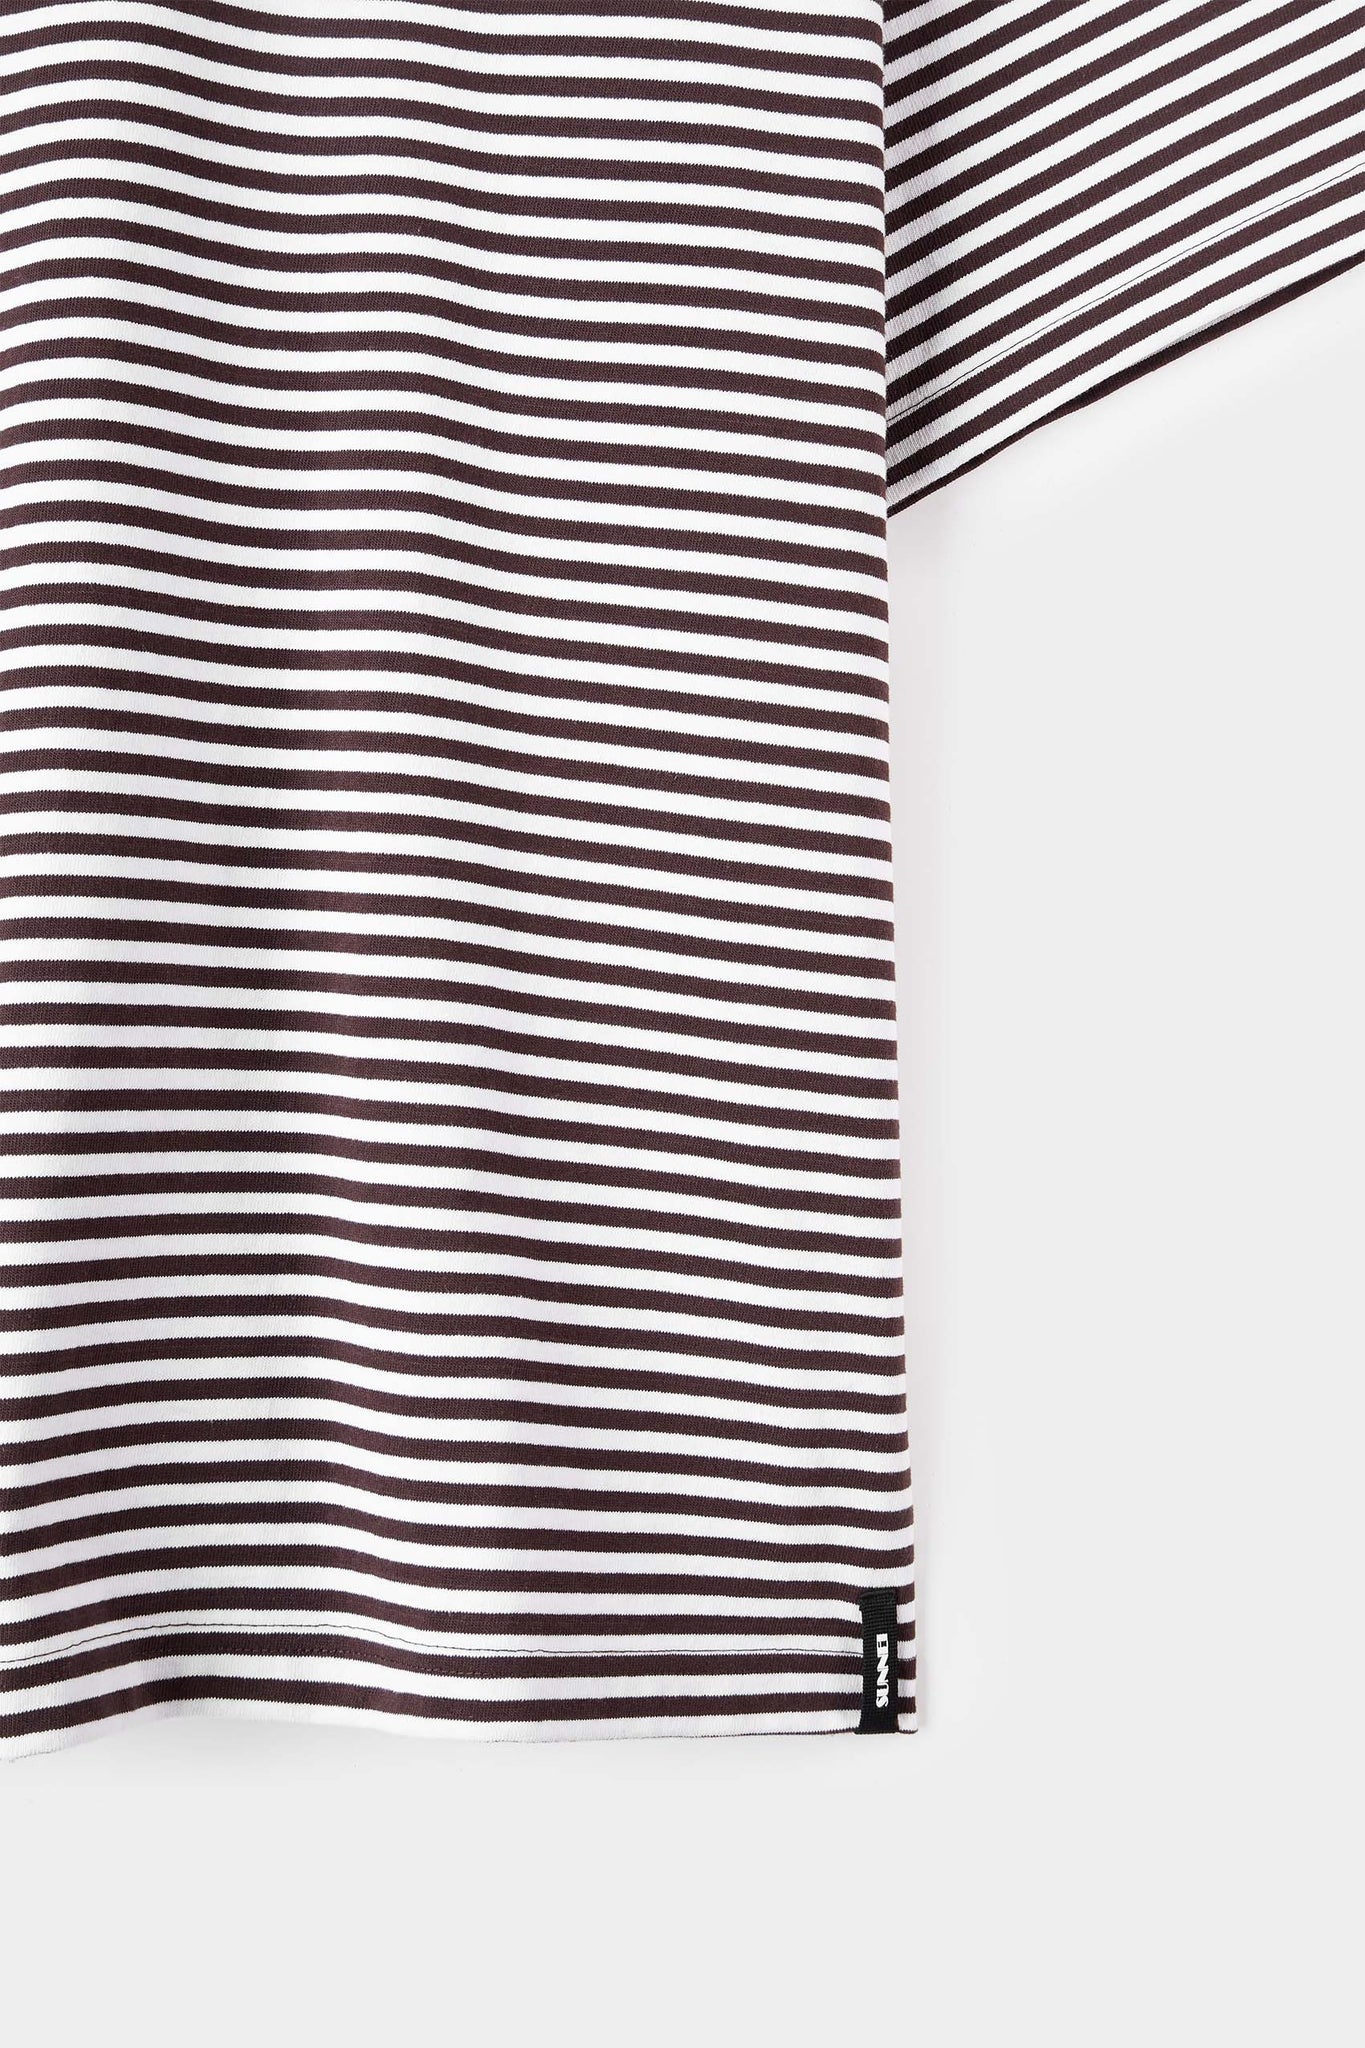 OVER T-SHIRT / brown & optical white stripes